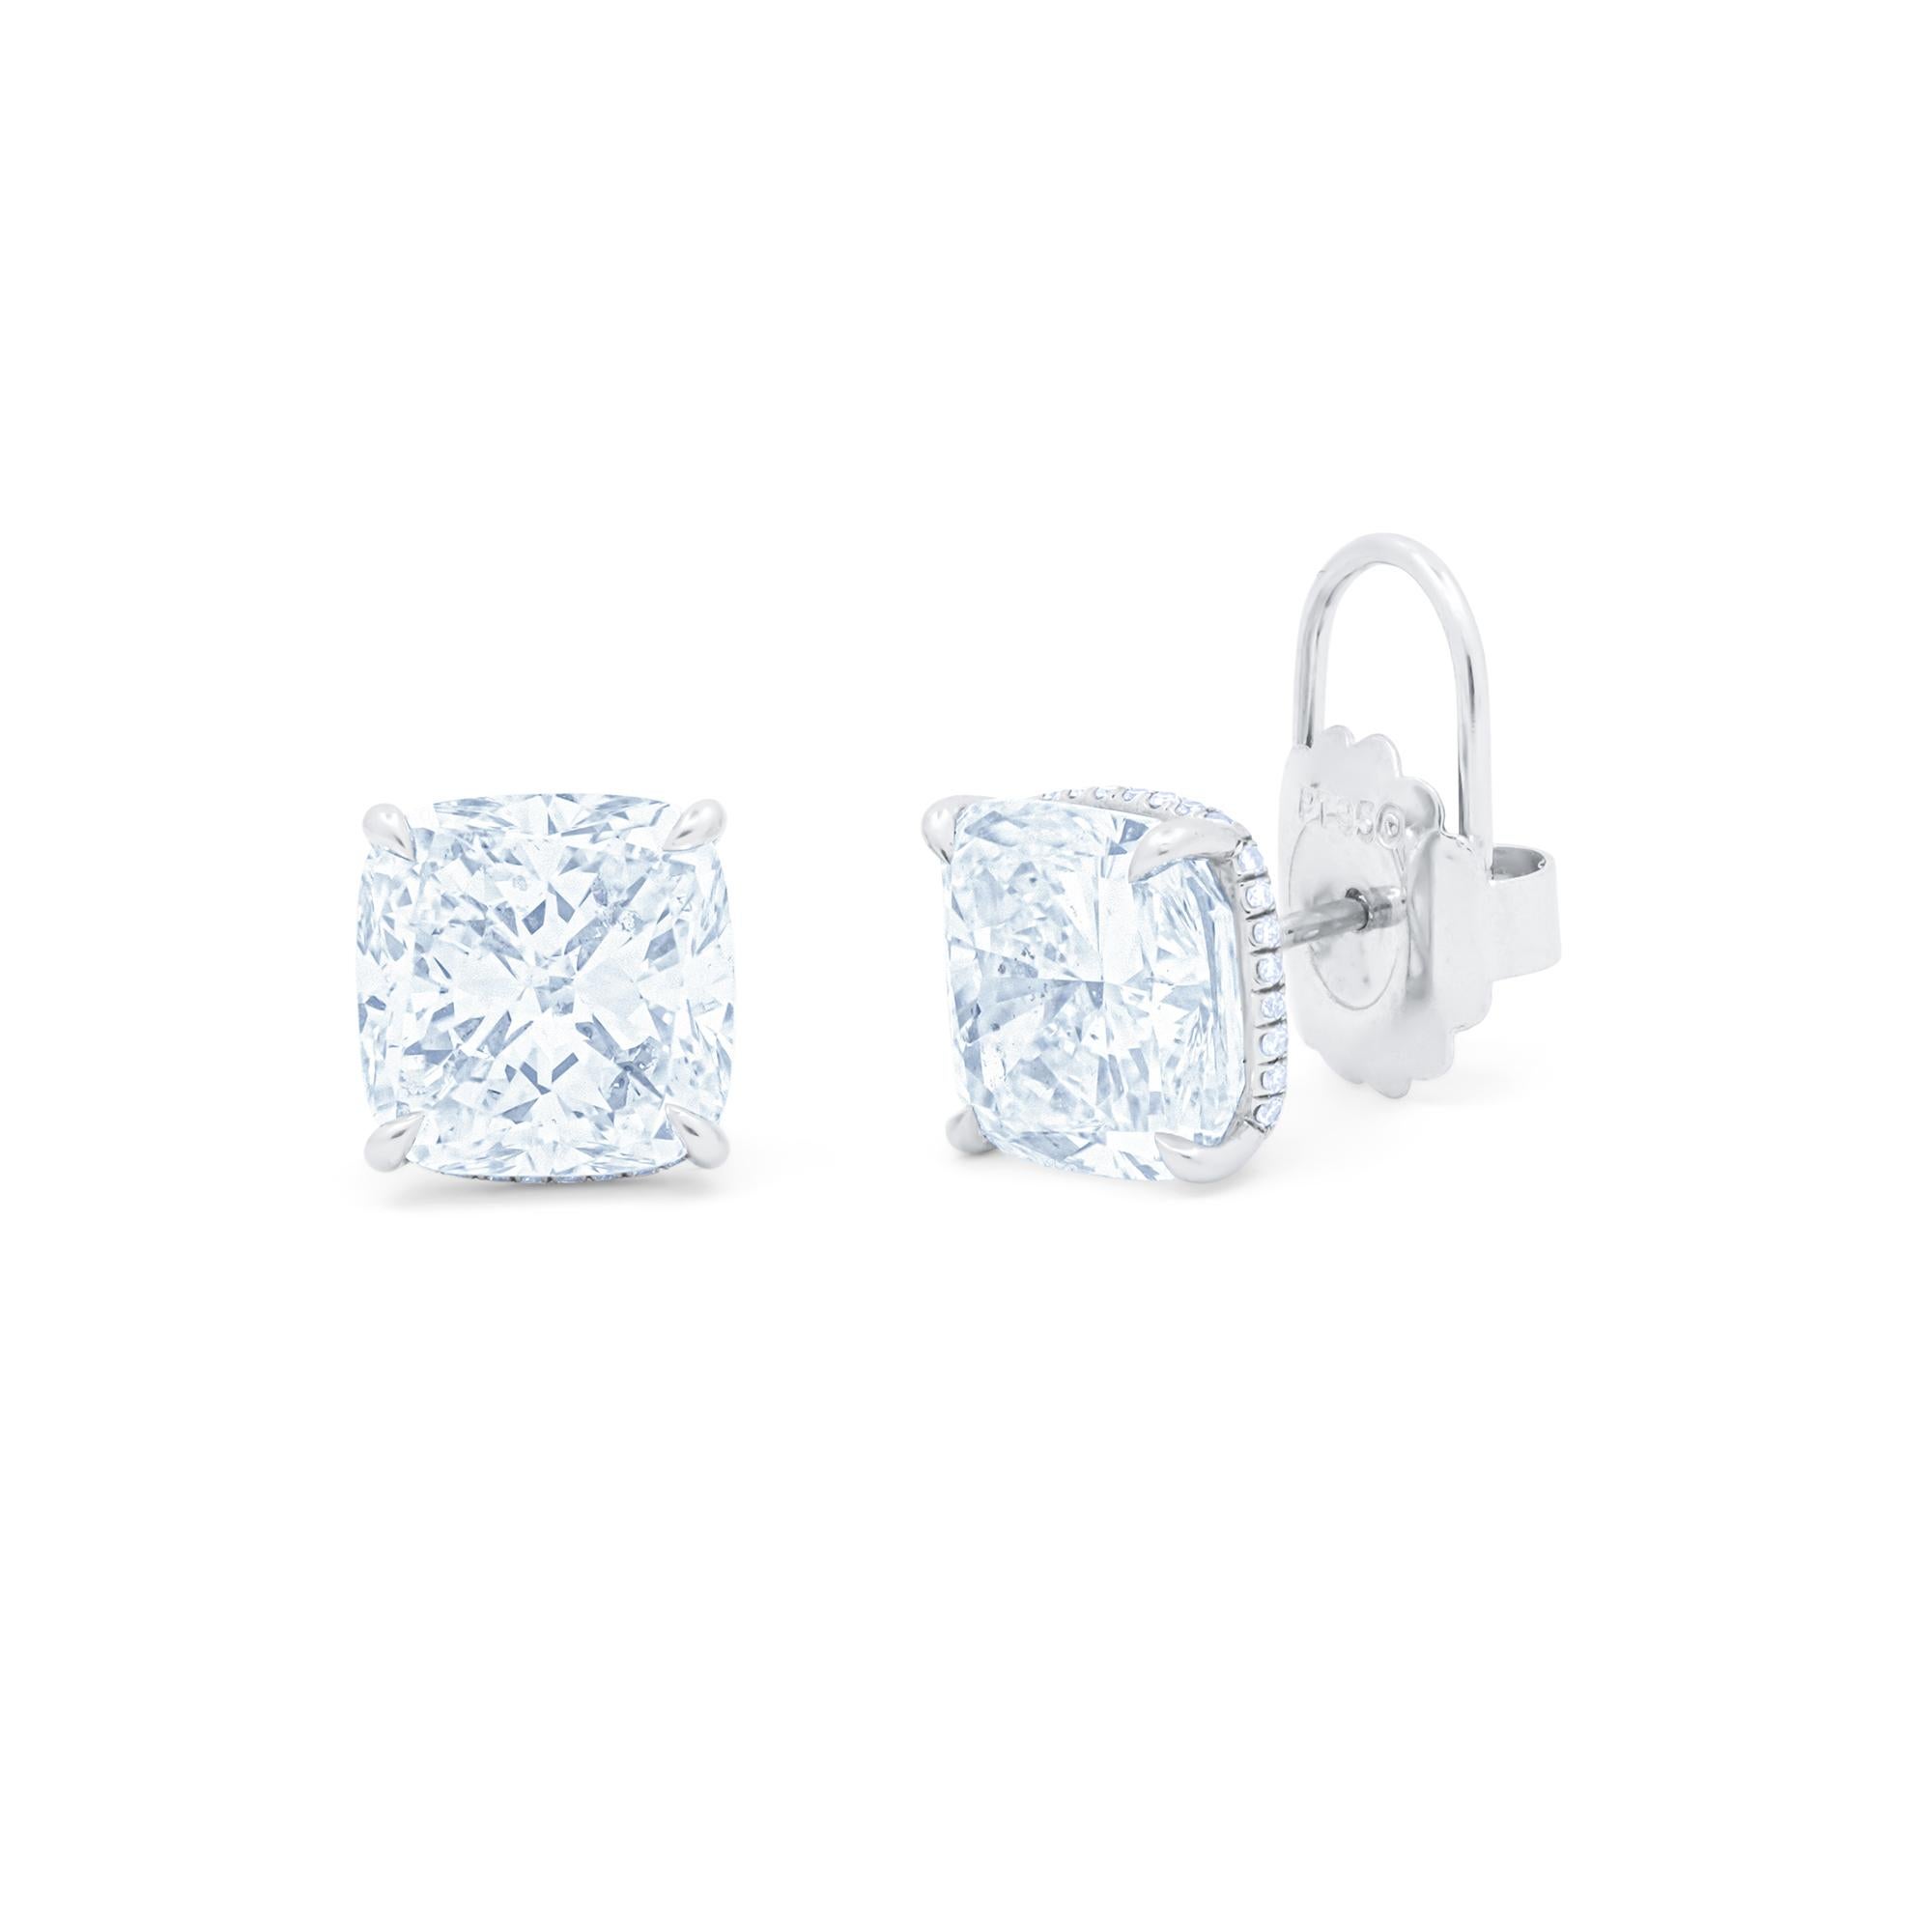 PLATINUM CUSTOM MADE STUDS WITH 5.02CT CUSTION H SI1  AND 5.51CTS H VS2  TOTAL 10.53CTS SET WITH .40PS OF PAVE ON SETTING Total 10.53cts total weight 
Diana M. is a leading supplier of top-quality fine jewelry for over 35 years.
Diana M is one-stop